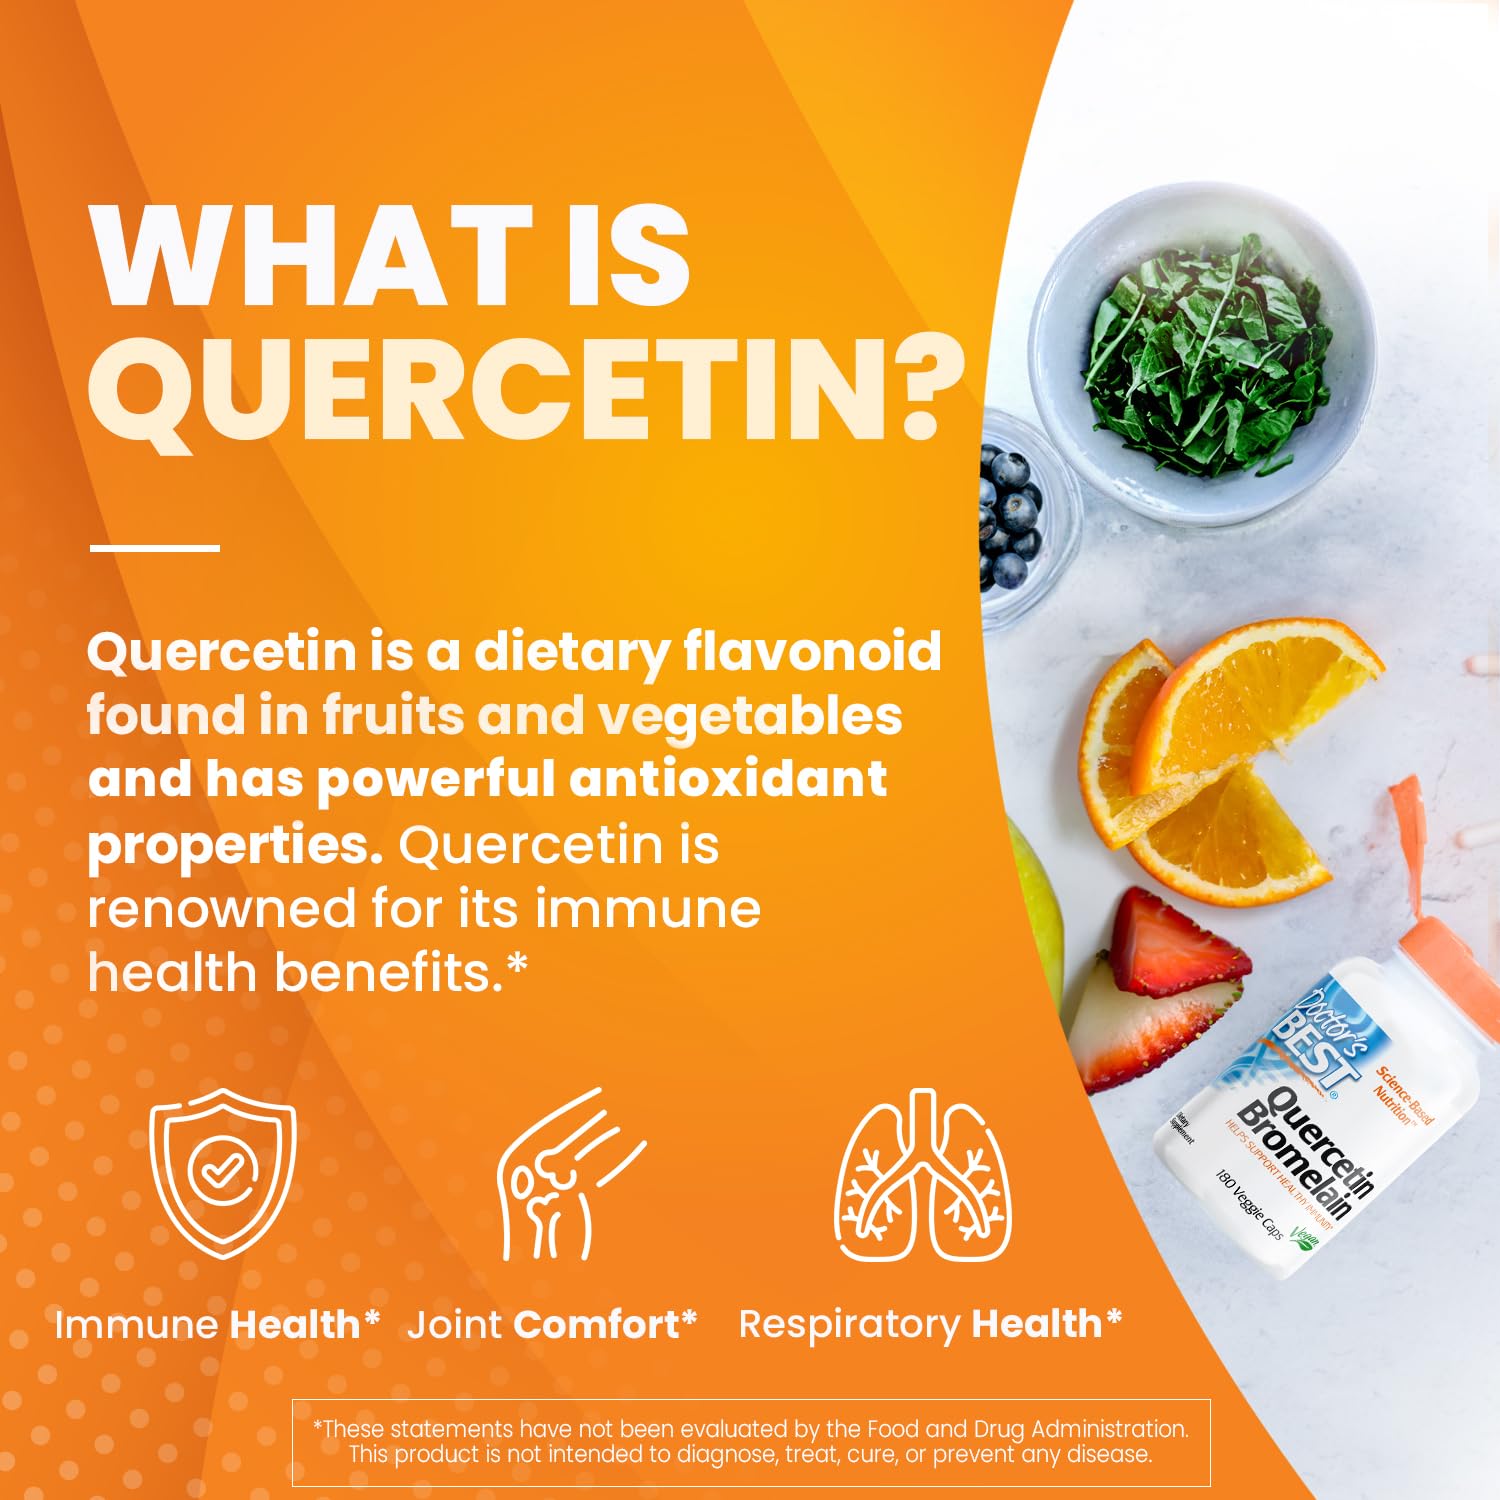 Doctor's Best Quercetin Bromelain, Immunity Support, Heart, Joint & Healthy Respiratory System, Non-GMO, Vegan, Gluten Free, Soy Free,180 VC